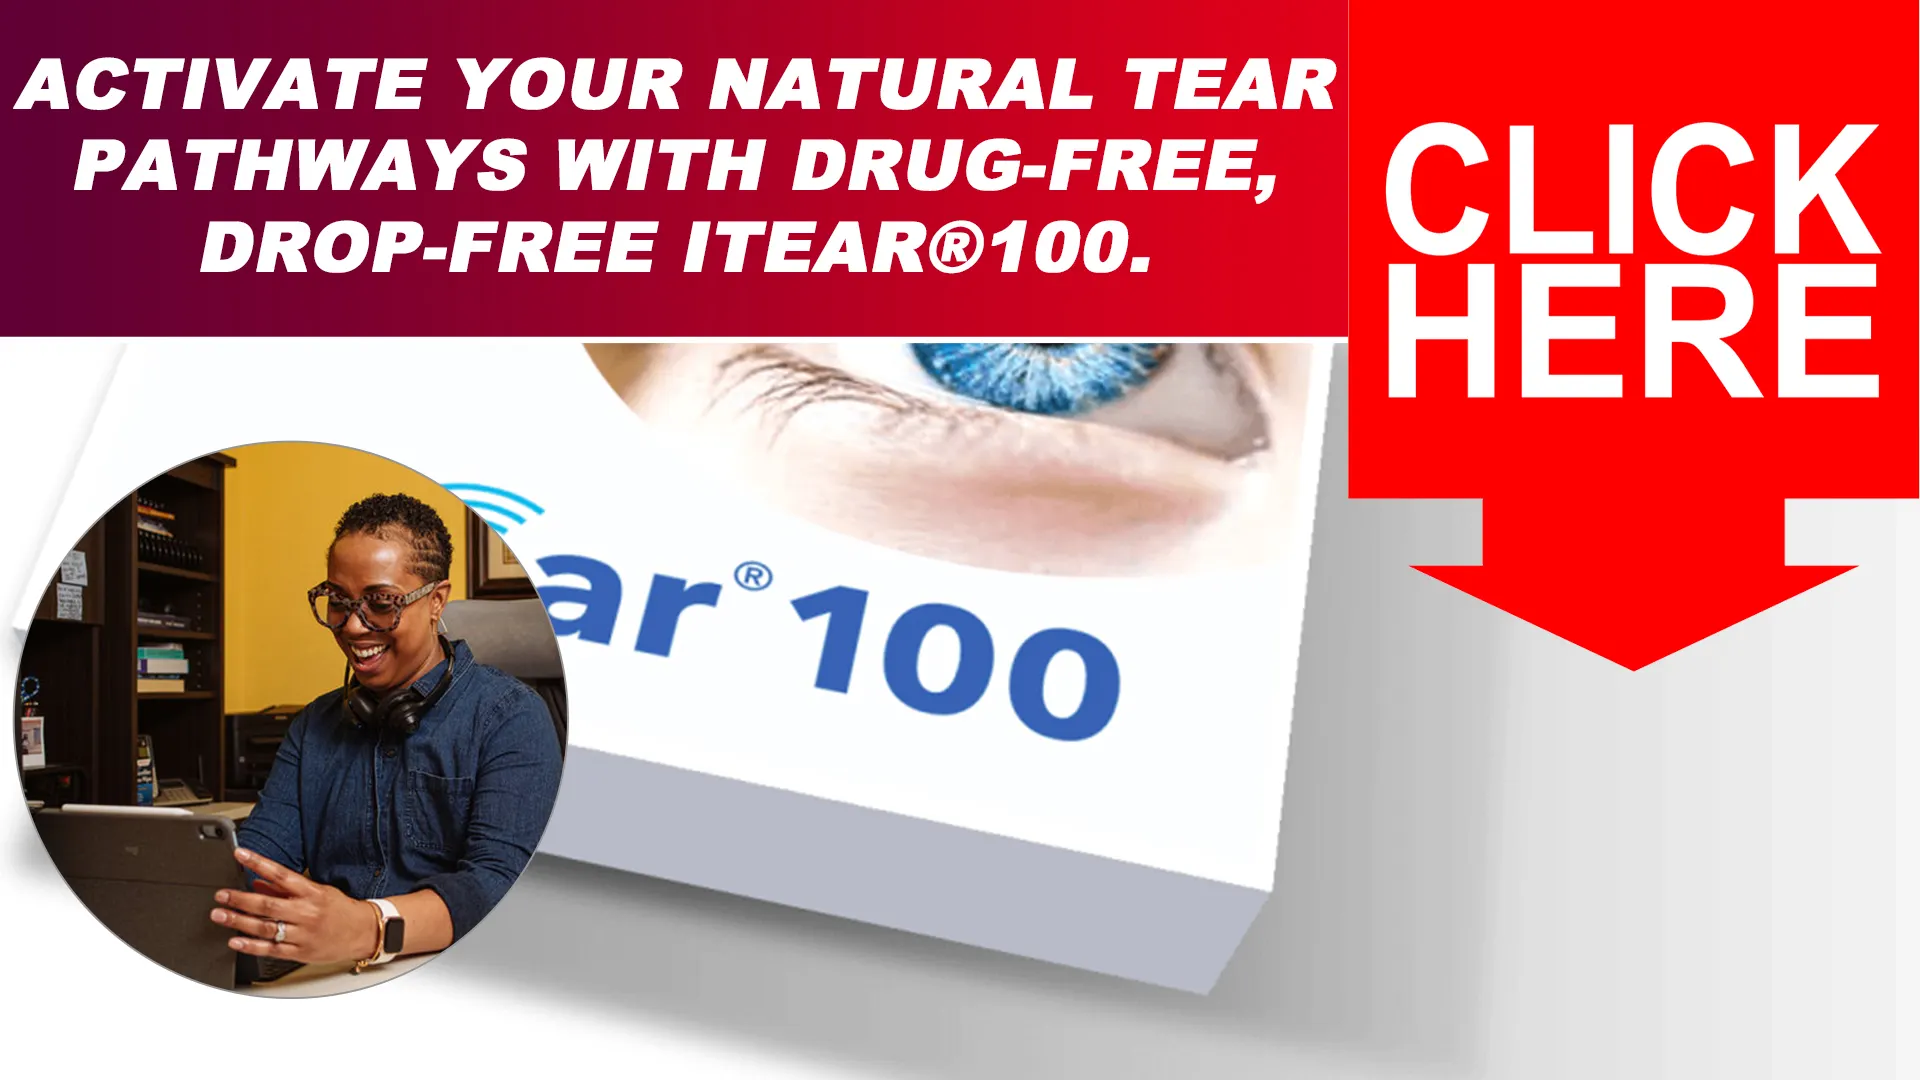 Why Choose the iTEAR100 Over Traditional Eye Drops?